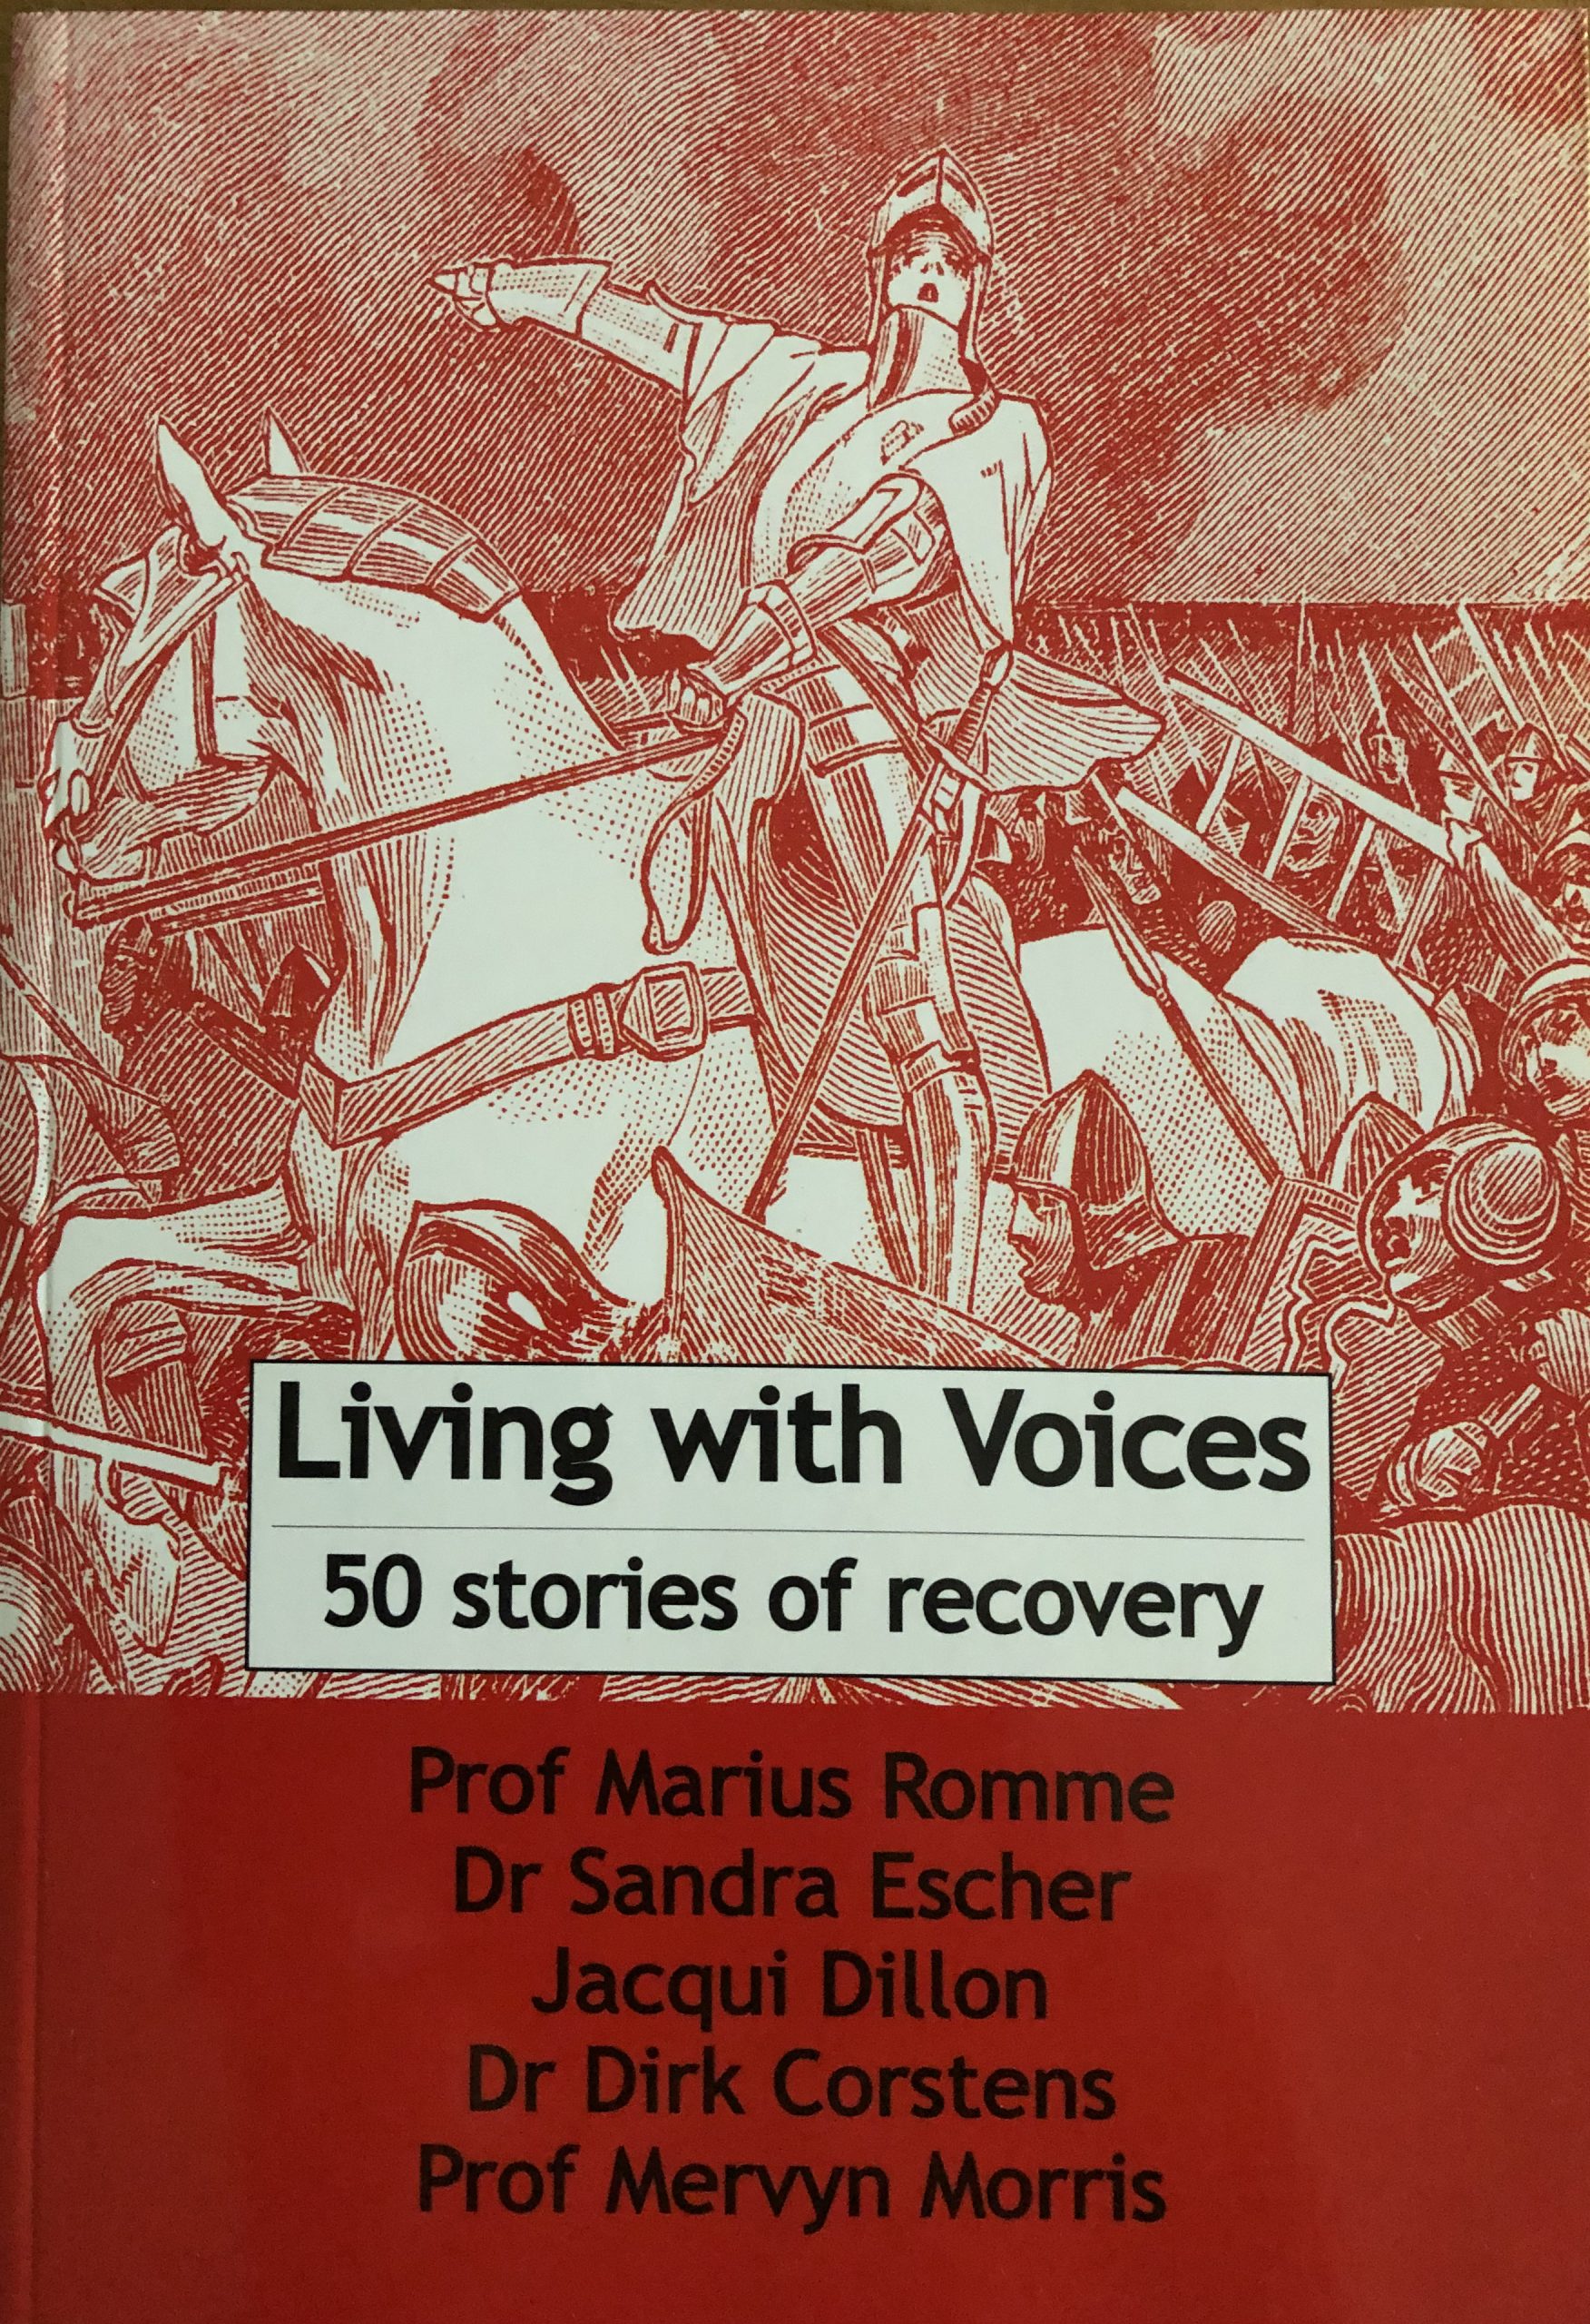 living with voices